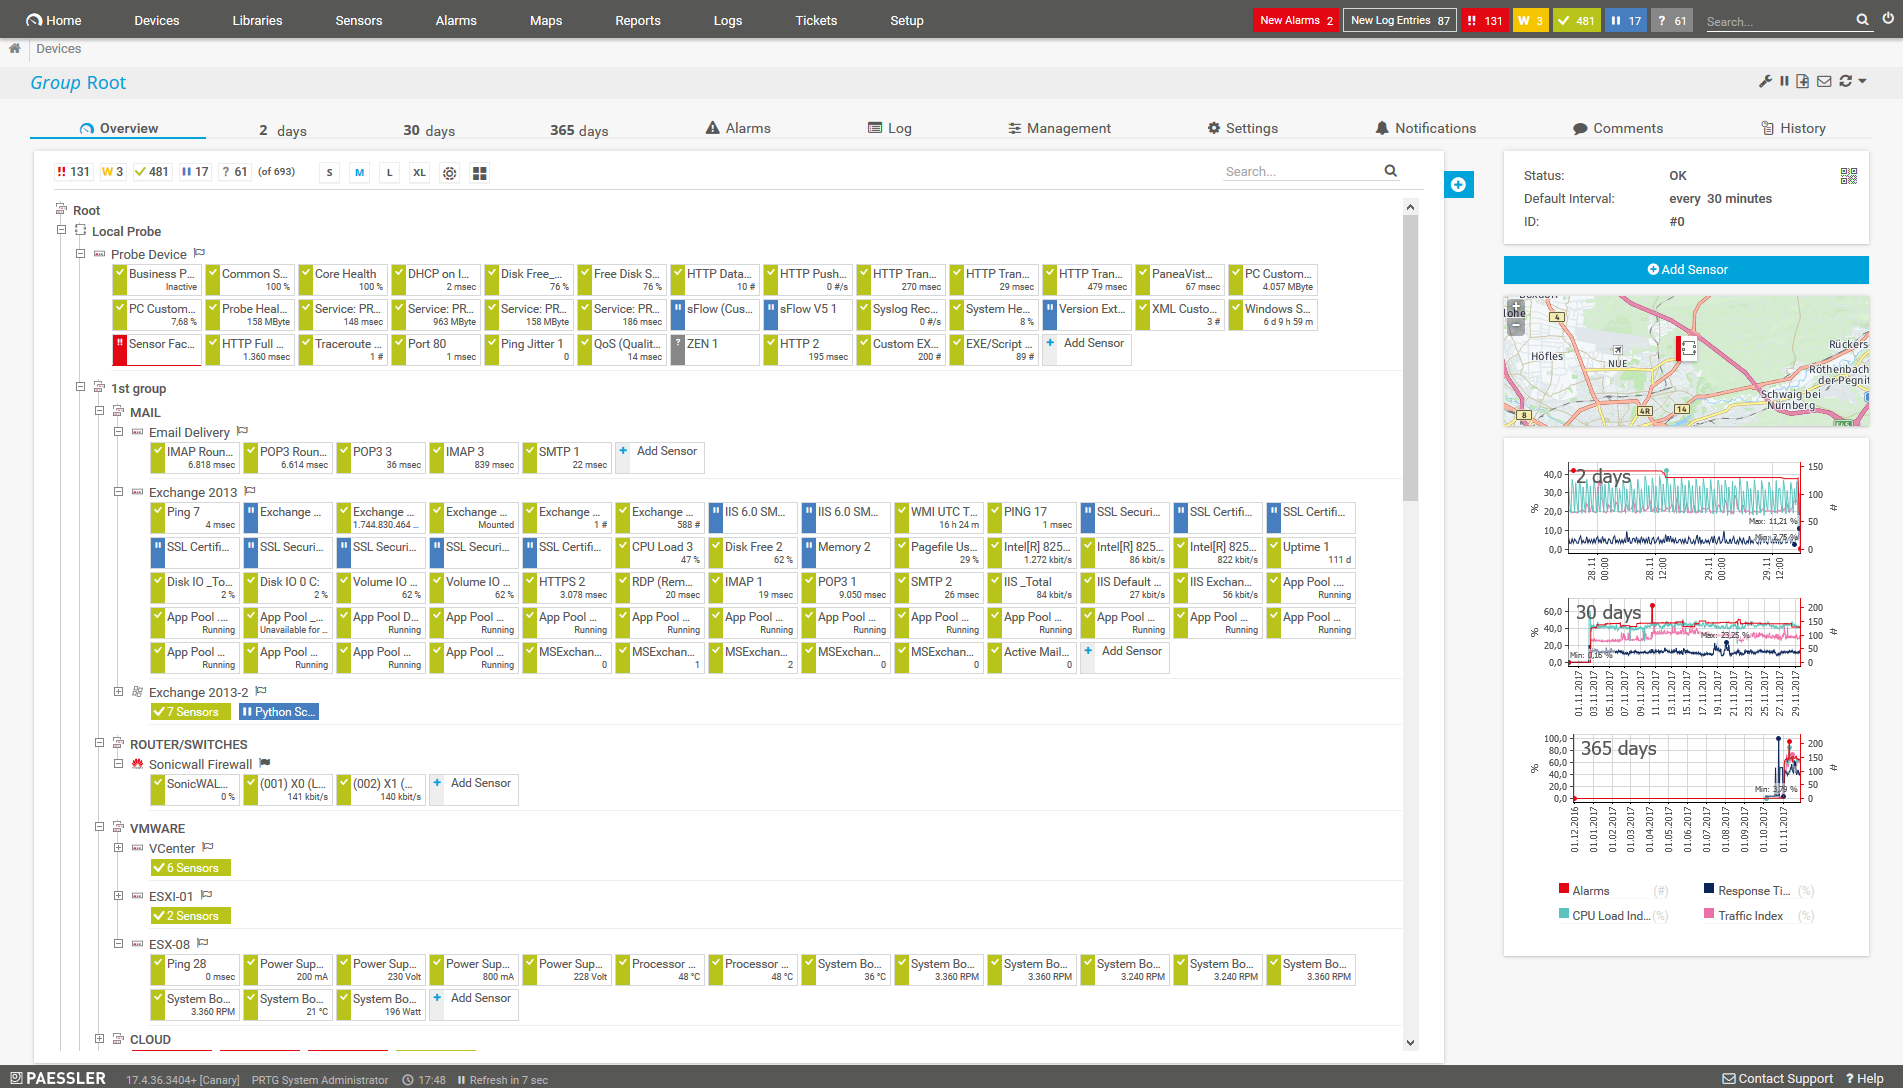 Device tree view of your entire monitoring setup